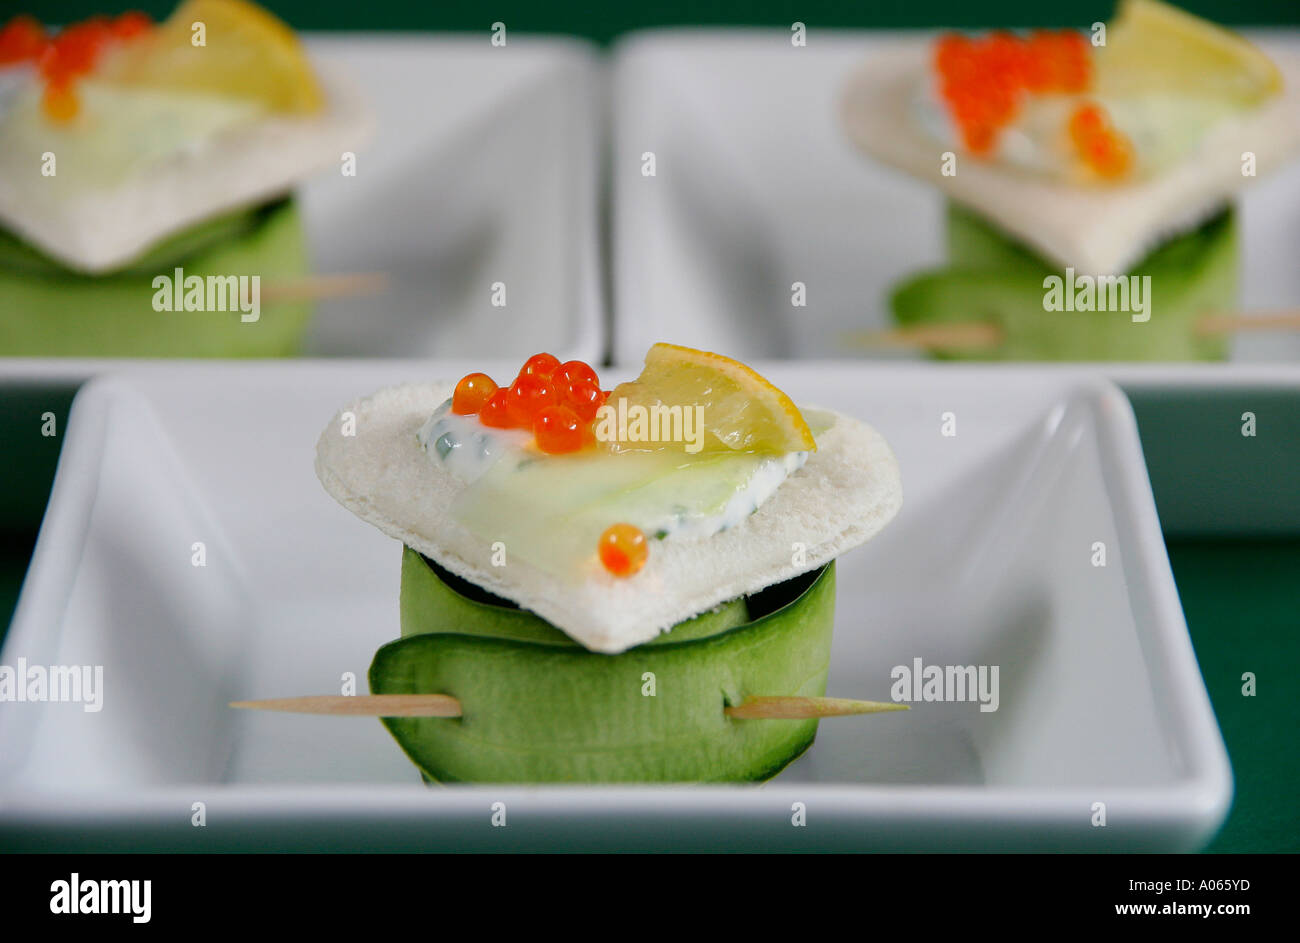 Leaf roll placed below a heart shaped garnished foodstuff is seen at close up Stock Photo